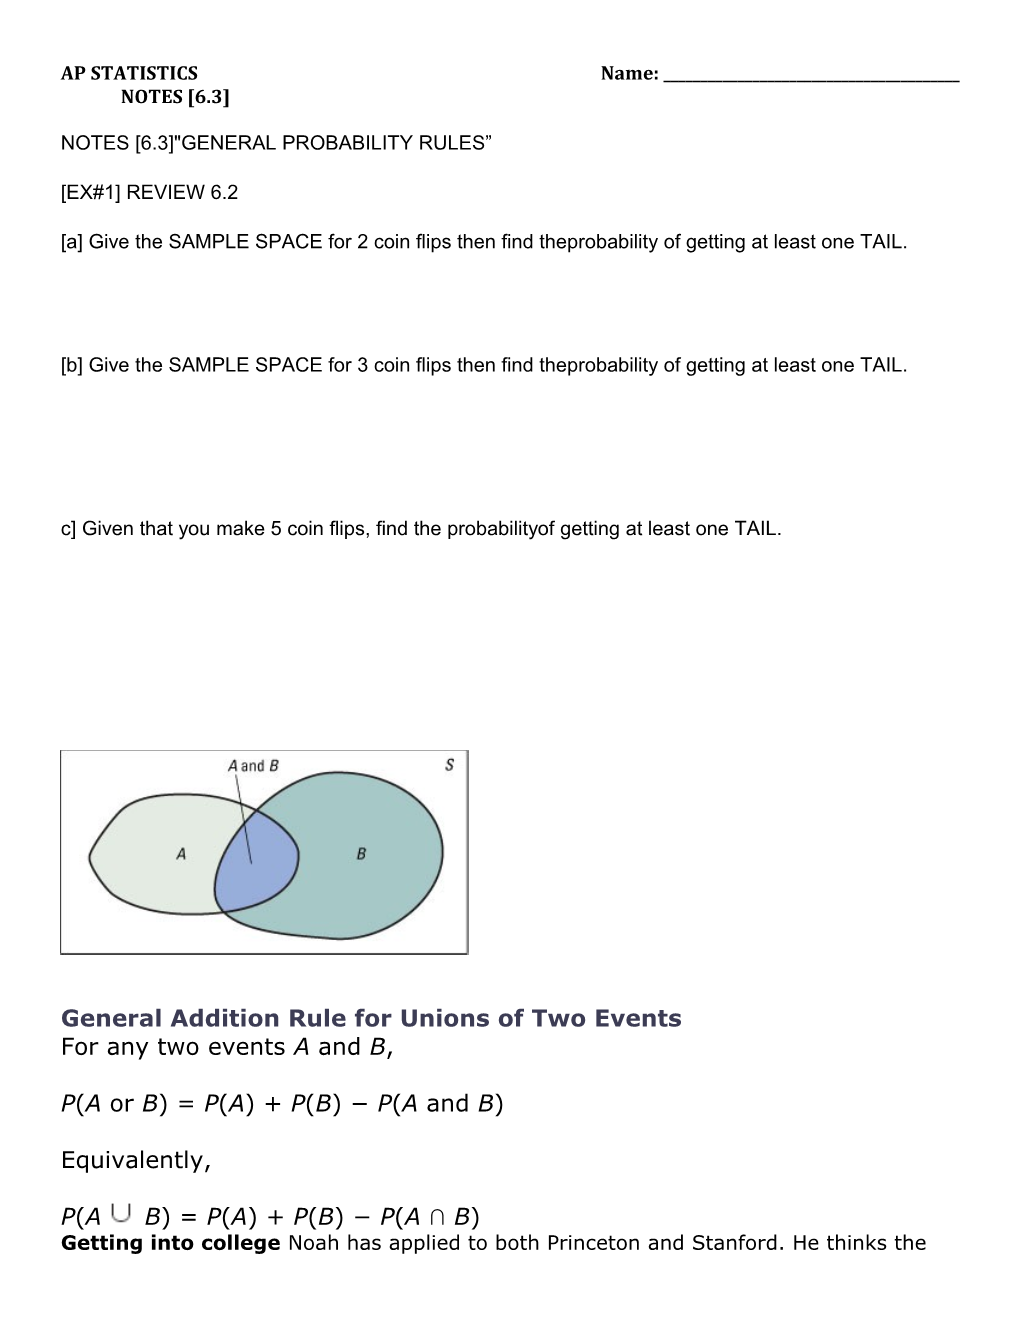 Notes 6.3 General Probability Rules